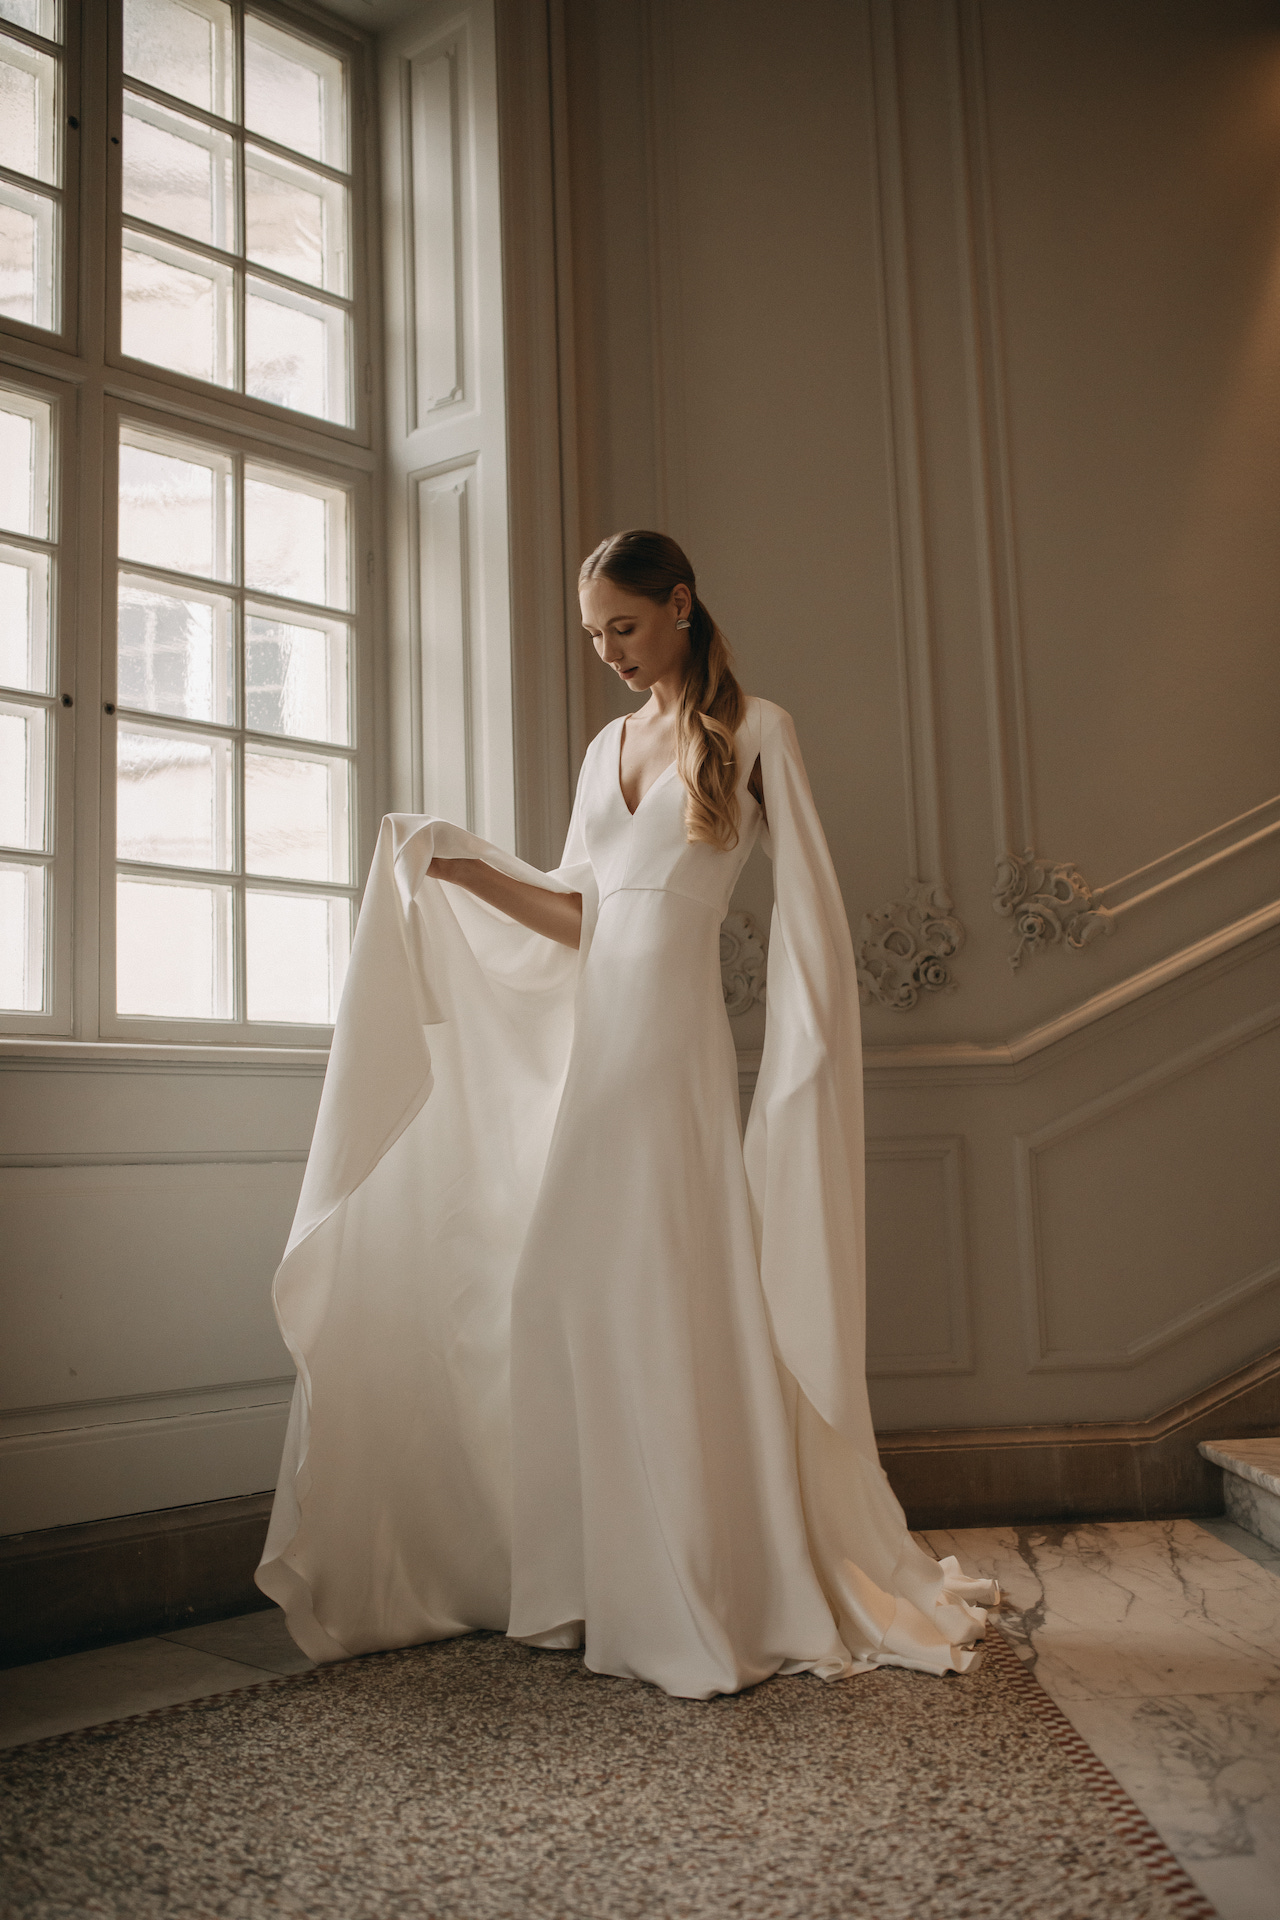 Andrea Hawkes bridal wedding dress with sleeve wings.